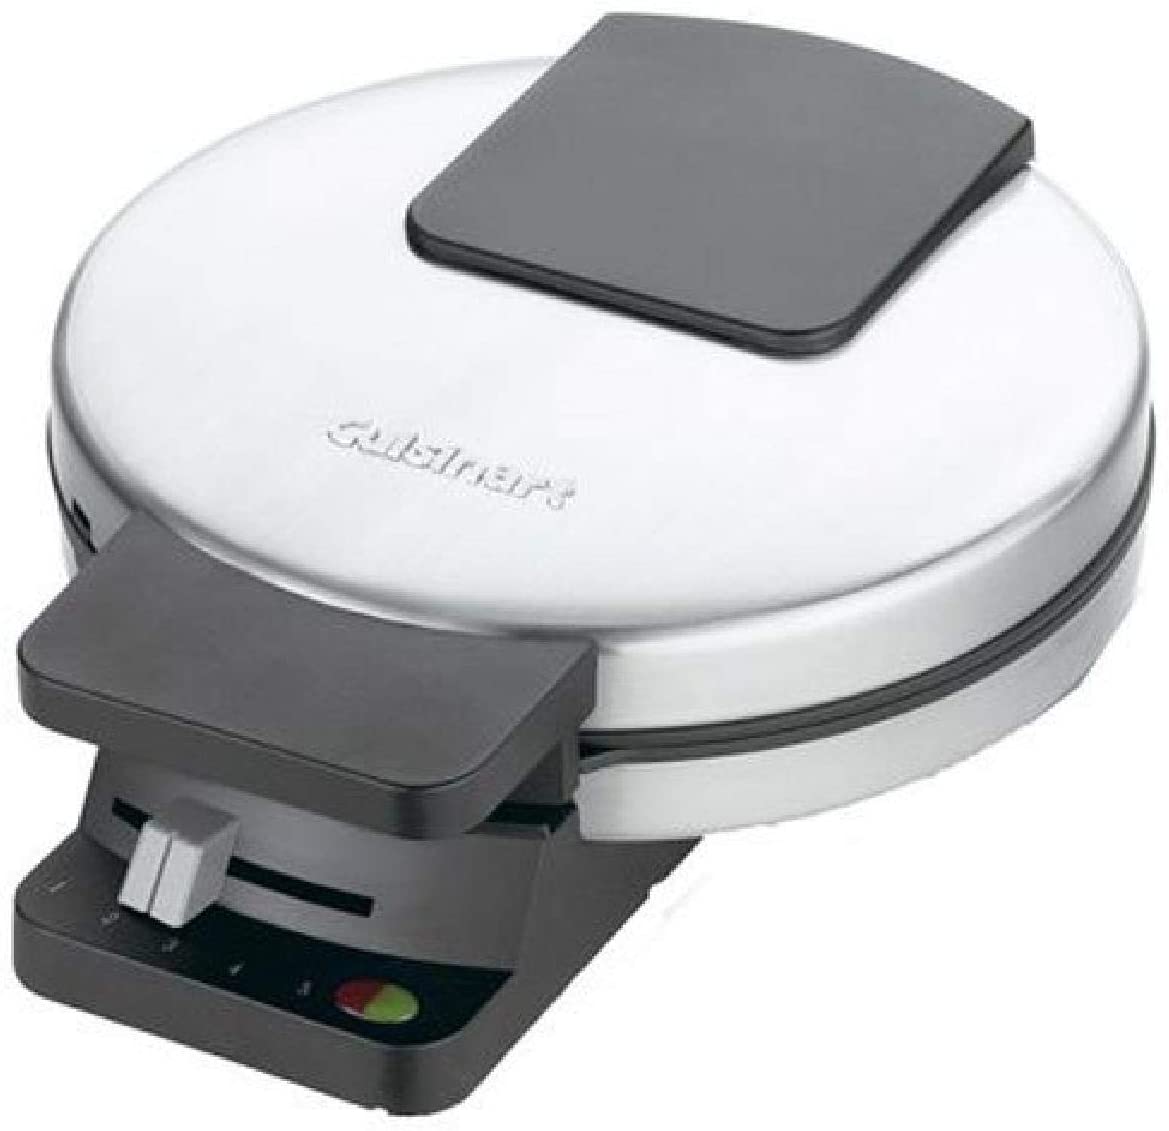 Round Classic Waffle maker by Cuisinart